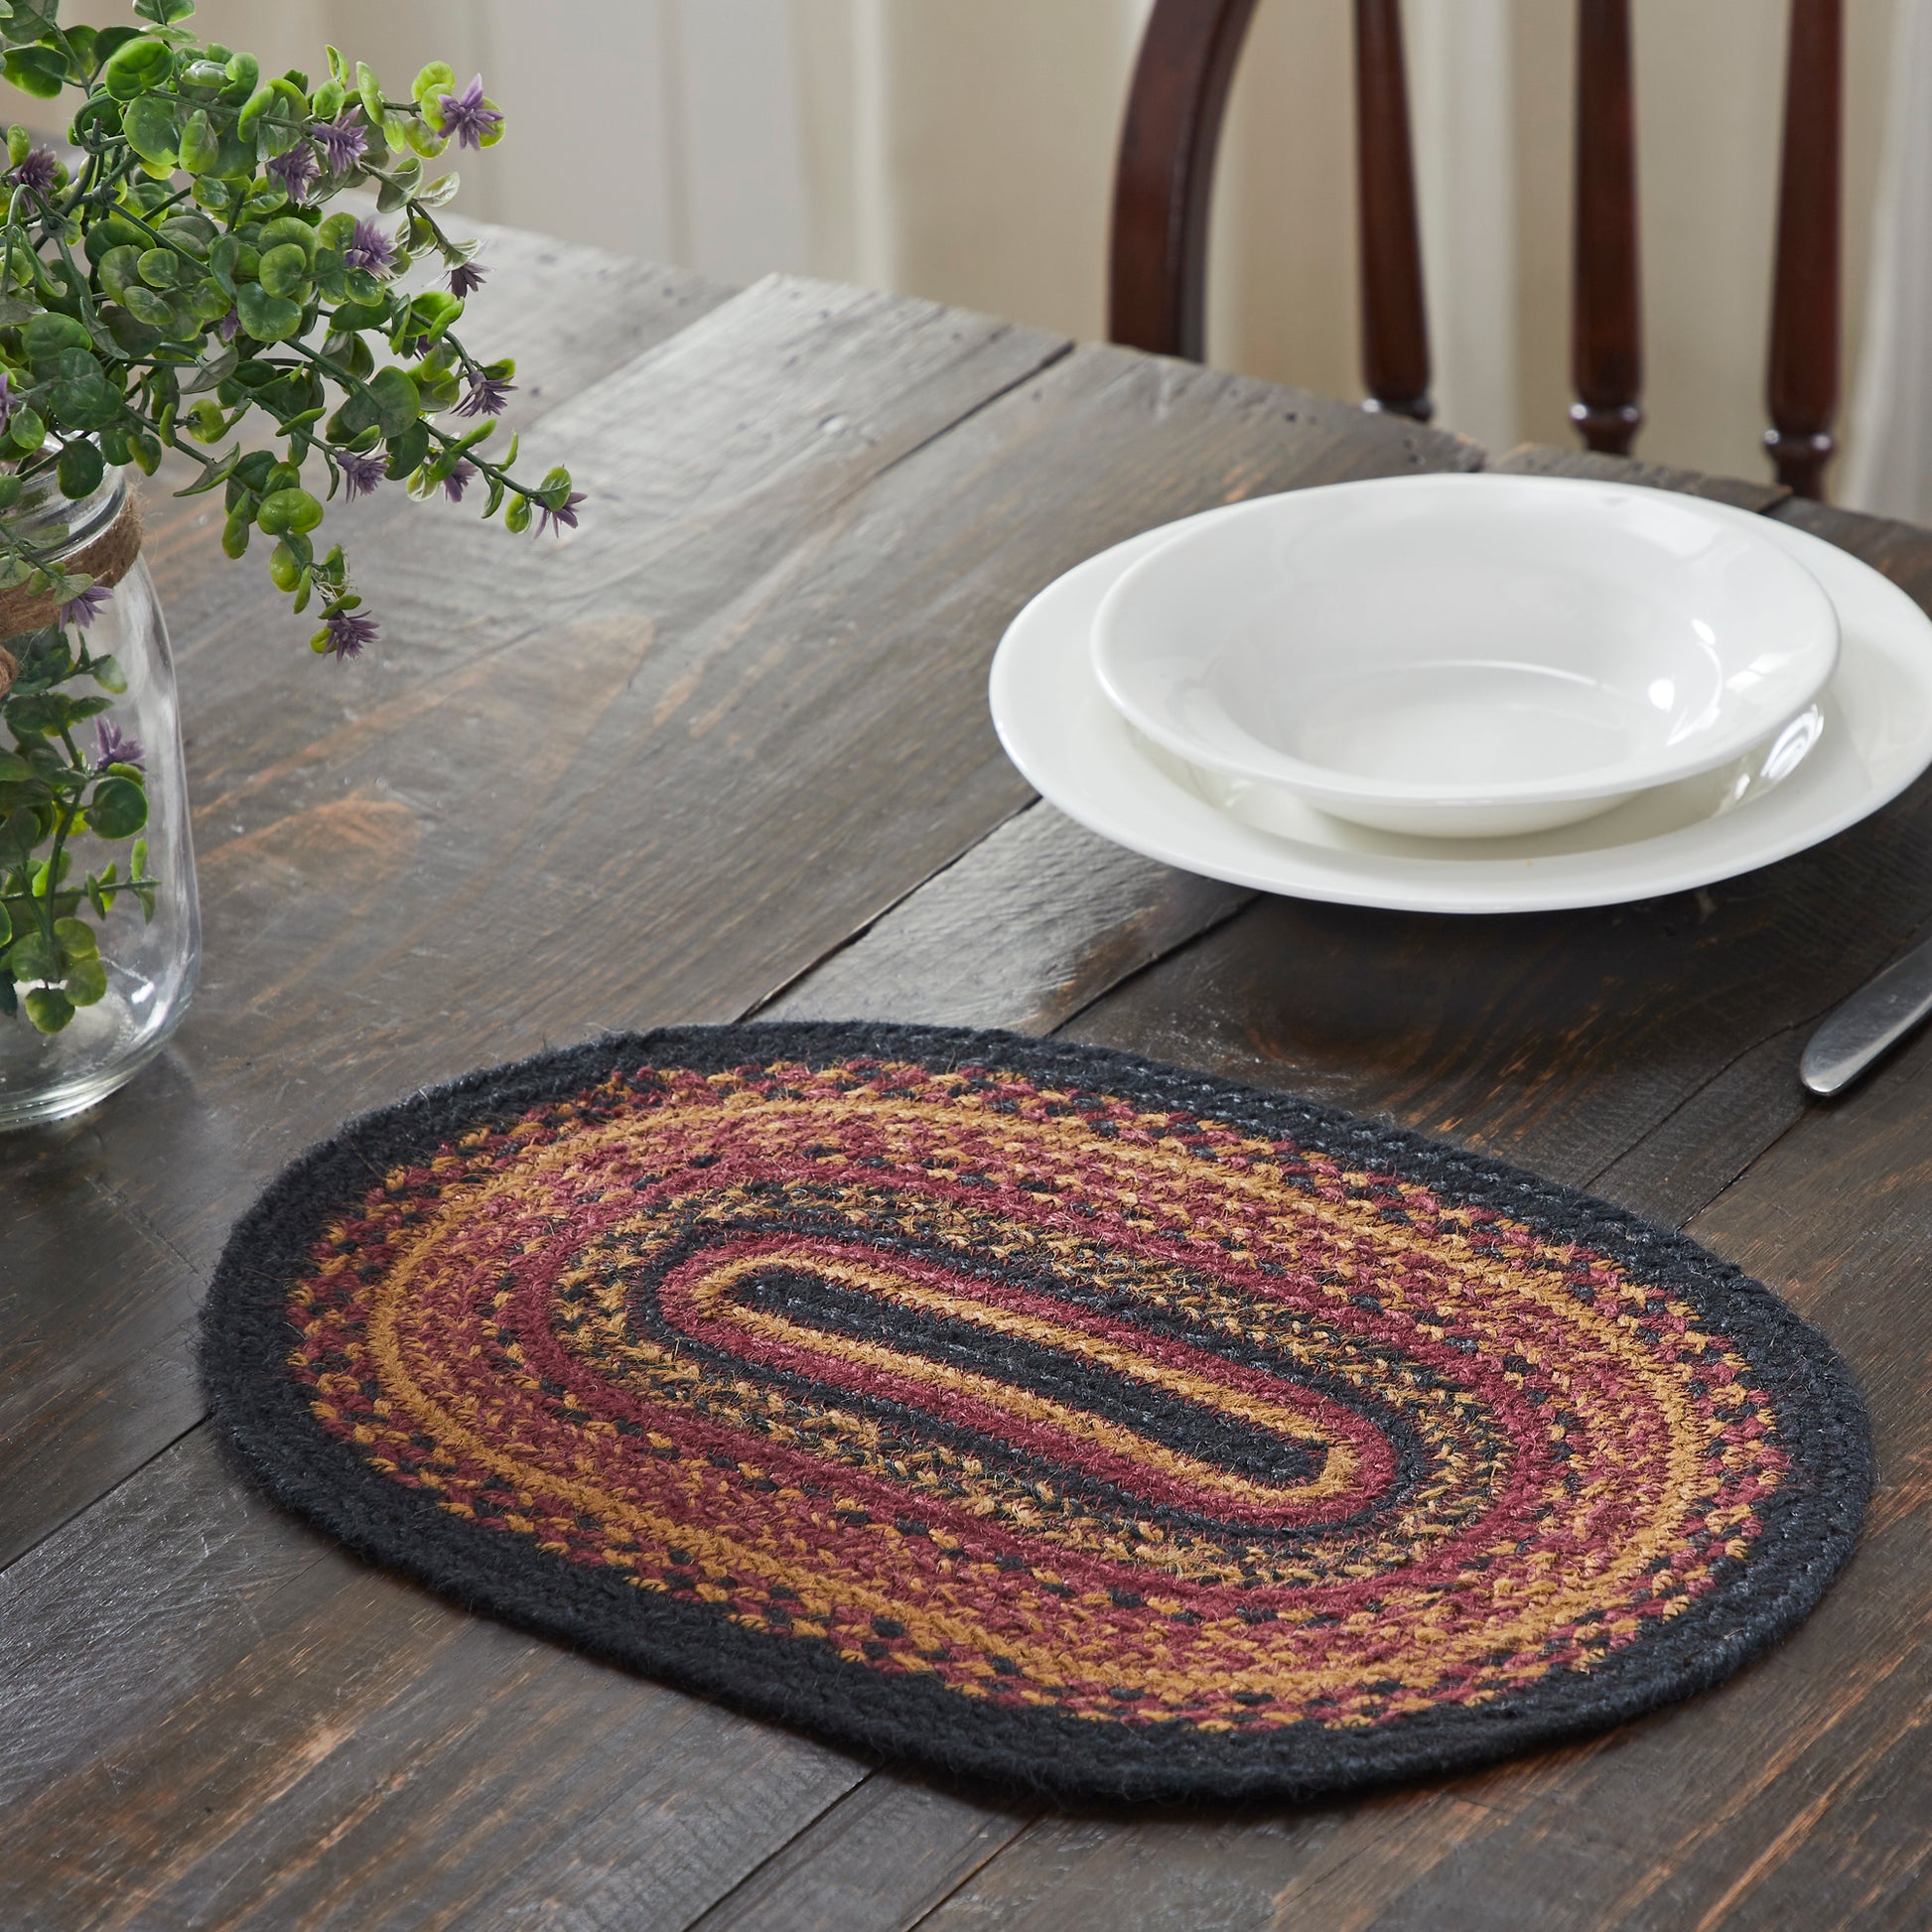 81363-Heritage-Farms-Jute-Oval-Placemat-12x18-image-5